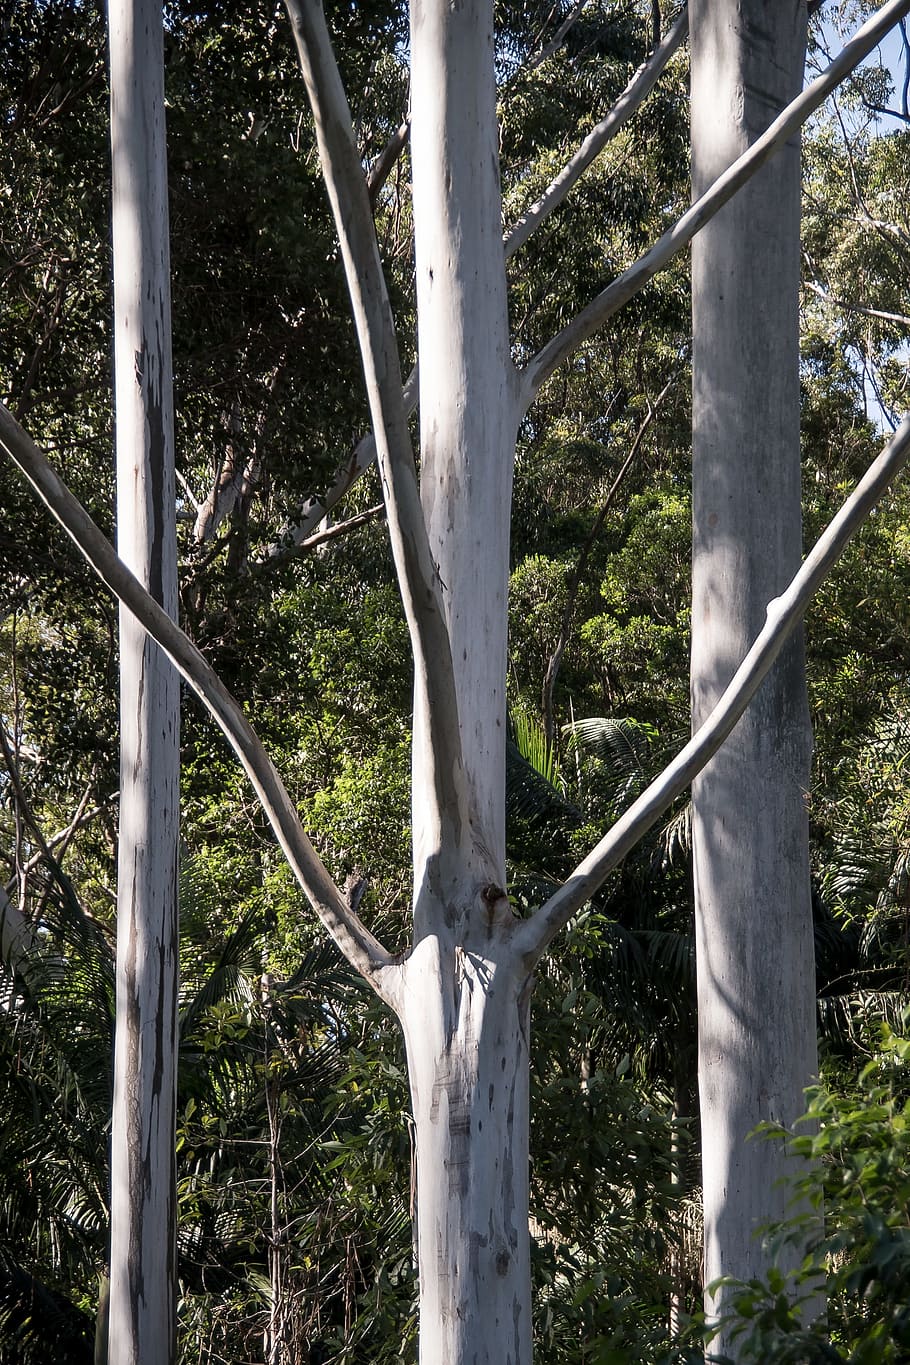 trees, rain forest, forest, australia, queensland, gum trees, eucalypts, green, silver, native